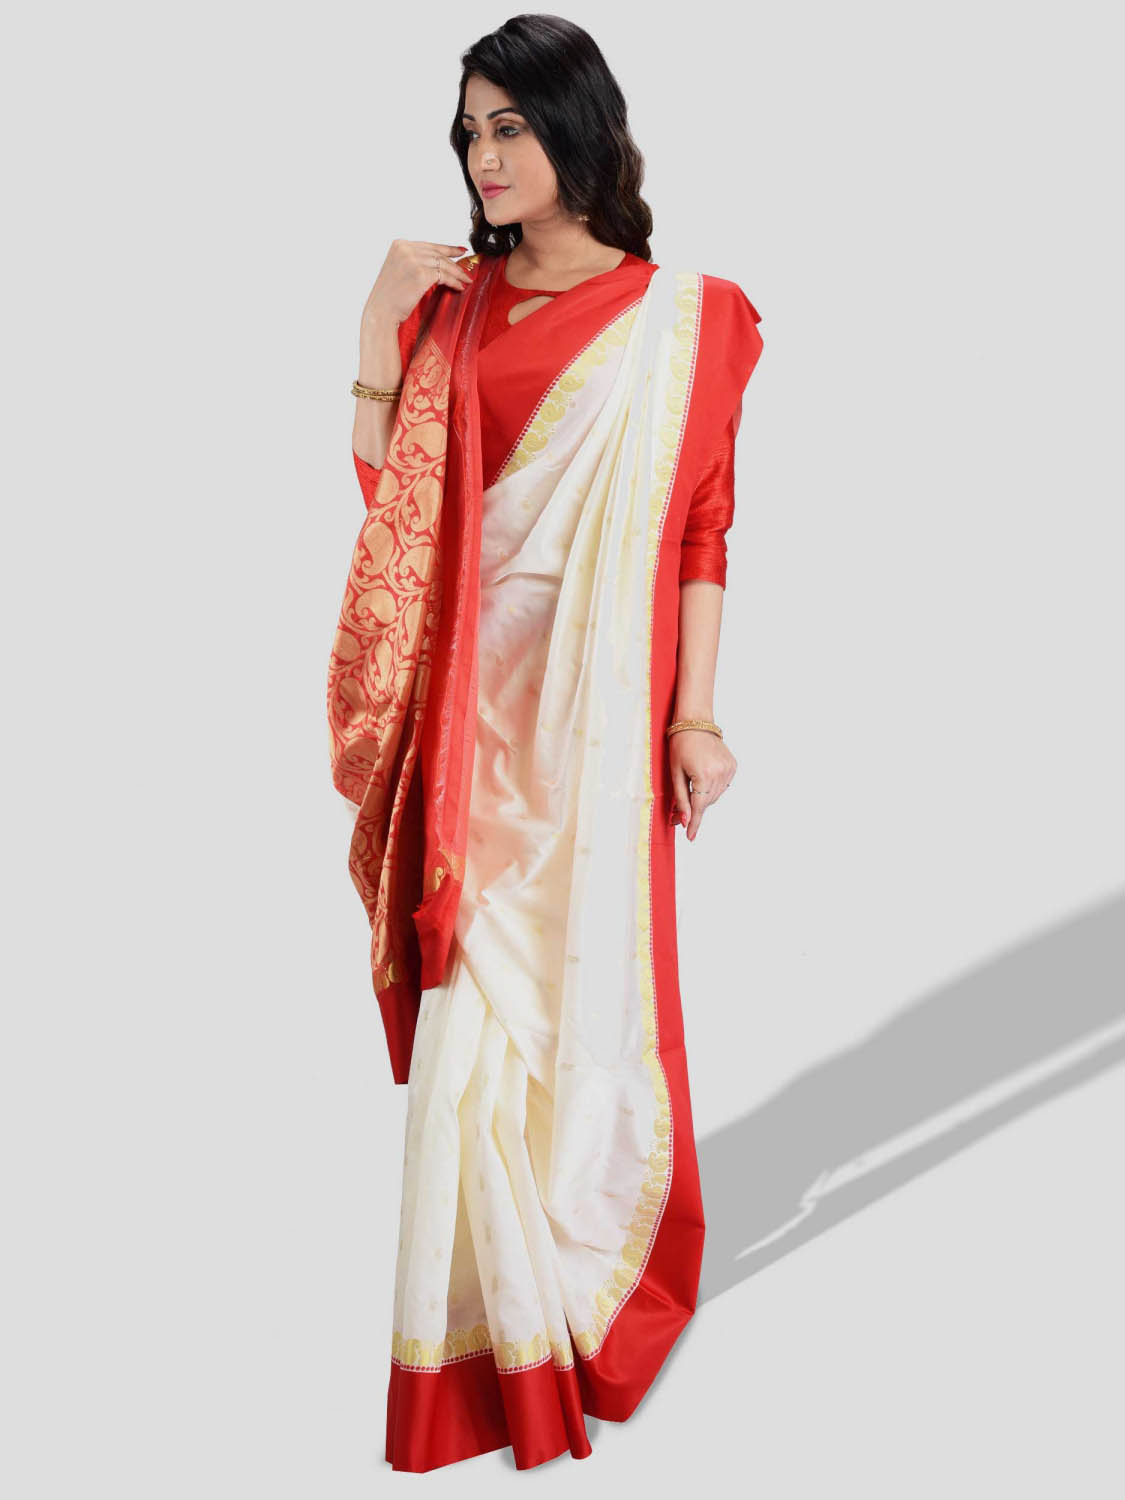 Women`s Bengal Garad Silk Saree Fine Smooth Garad Silk Saree With Blouse Pcs. Handmade Exclusive Flower with Kalka with Whole Body Design (White and Red)